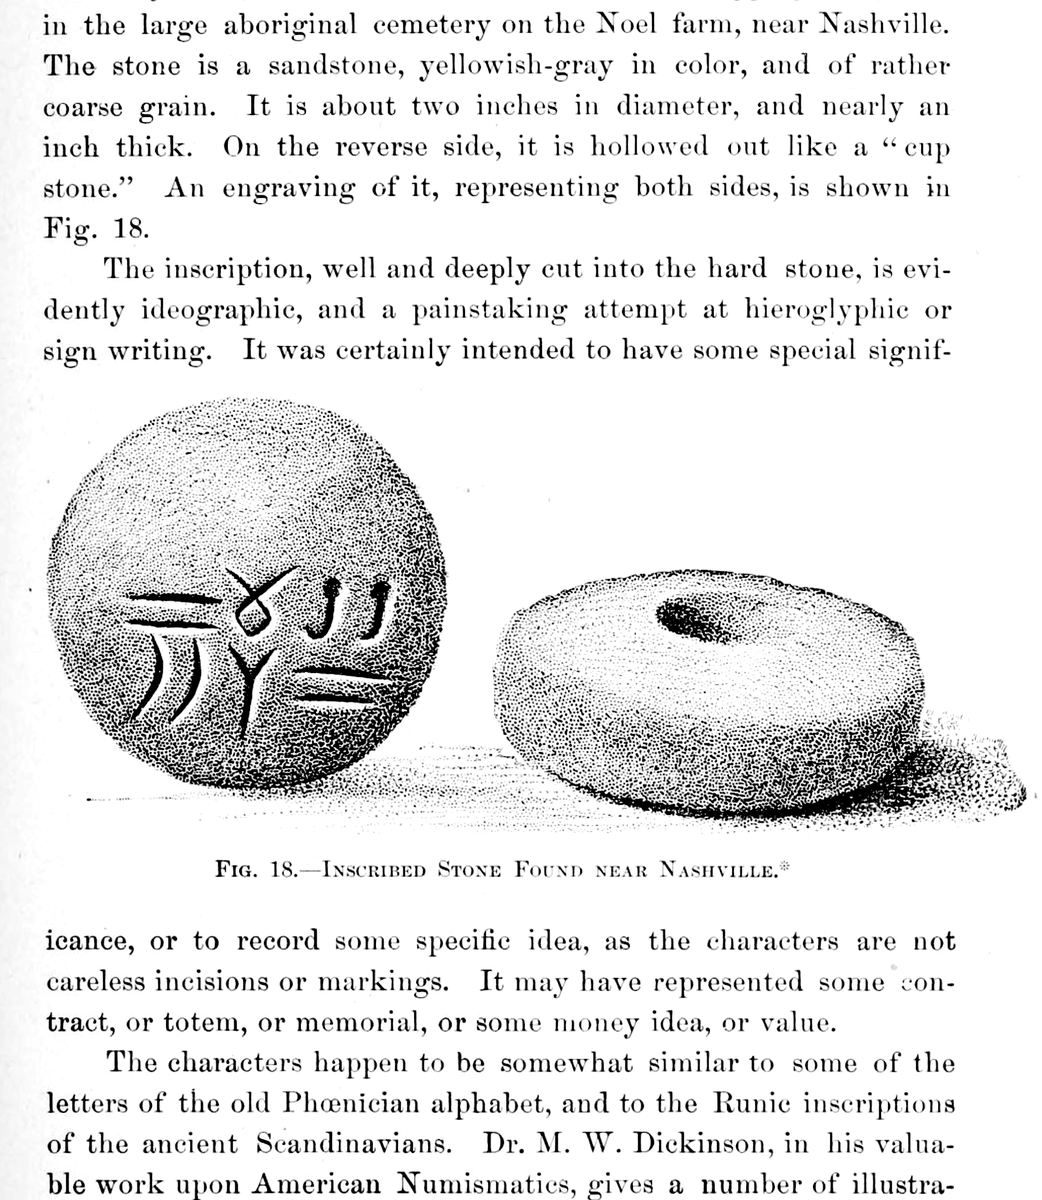 Archaeological anomaly: This 2-inch diameter sandstone disc was found at a mound site in Nashville in the mid-1800s. One side was inscribed while the other had a hollowed out circular indentation. I have no idea what became of it. From: Thruston 1890. Maybe @RealScottWolter has…